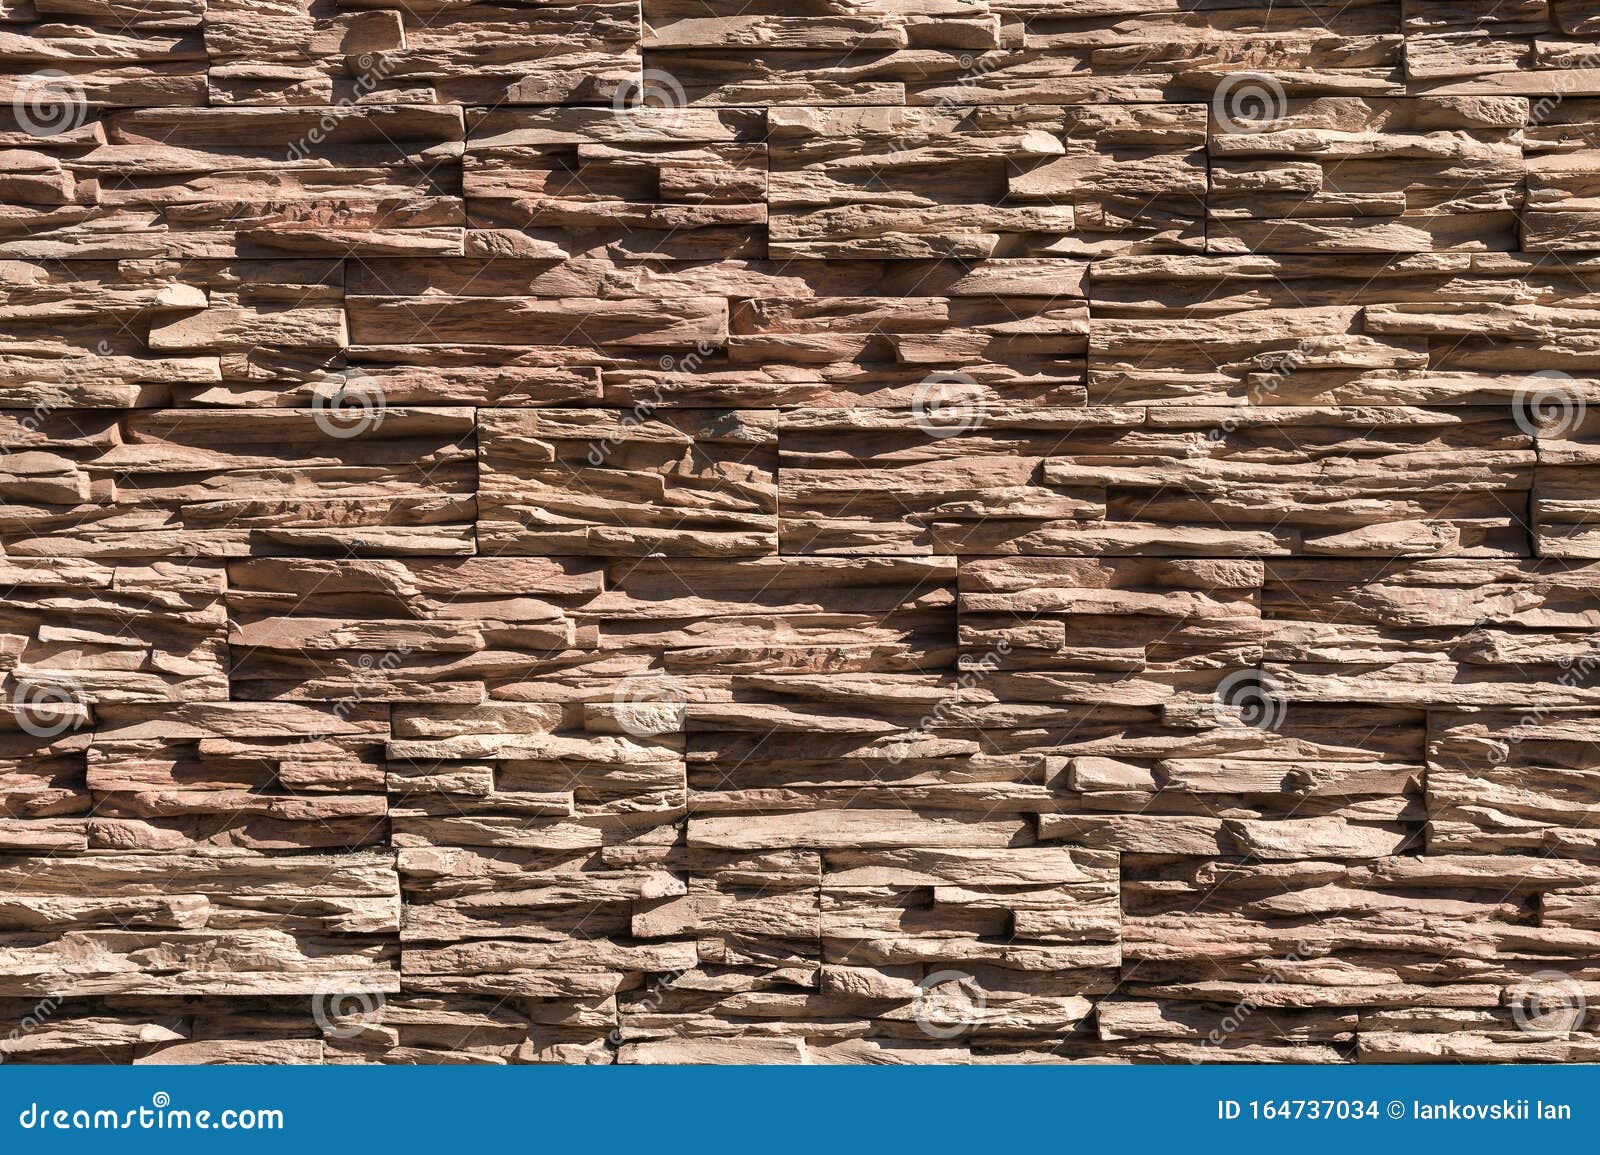 Abstract Beige Brown Slate Pattern Stone Block Wall Texture For Background And Wallpaper Large And Wide Modern Stone Stock Photo Image Of Outdoors Marble 164737034